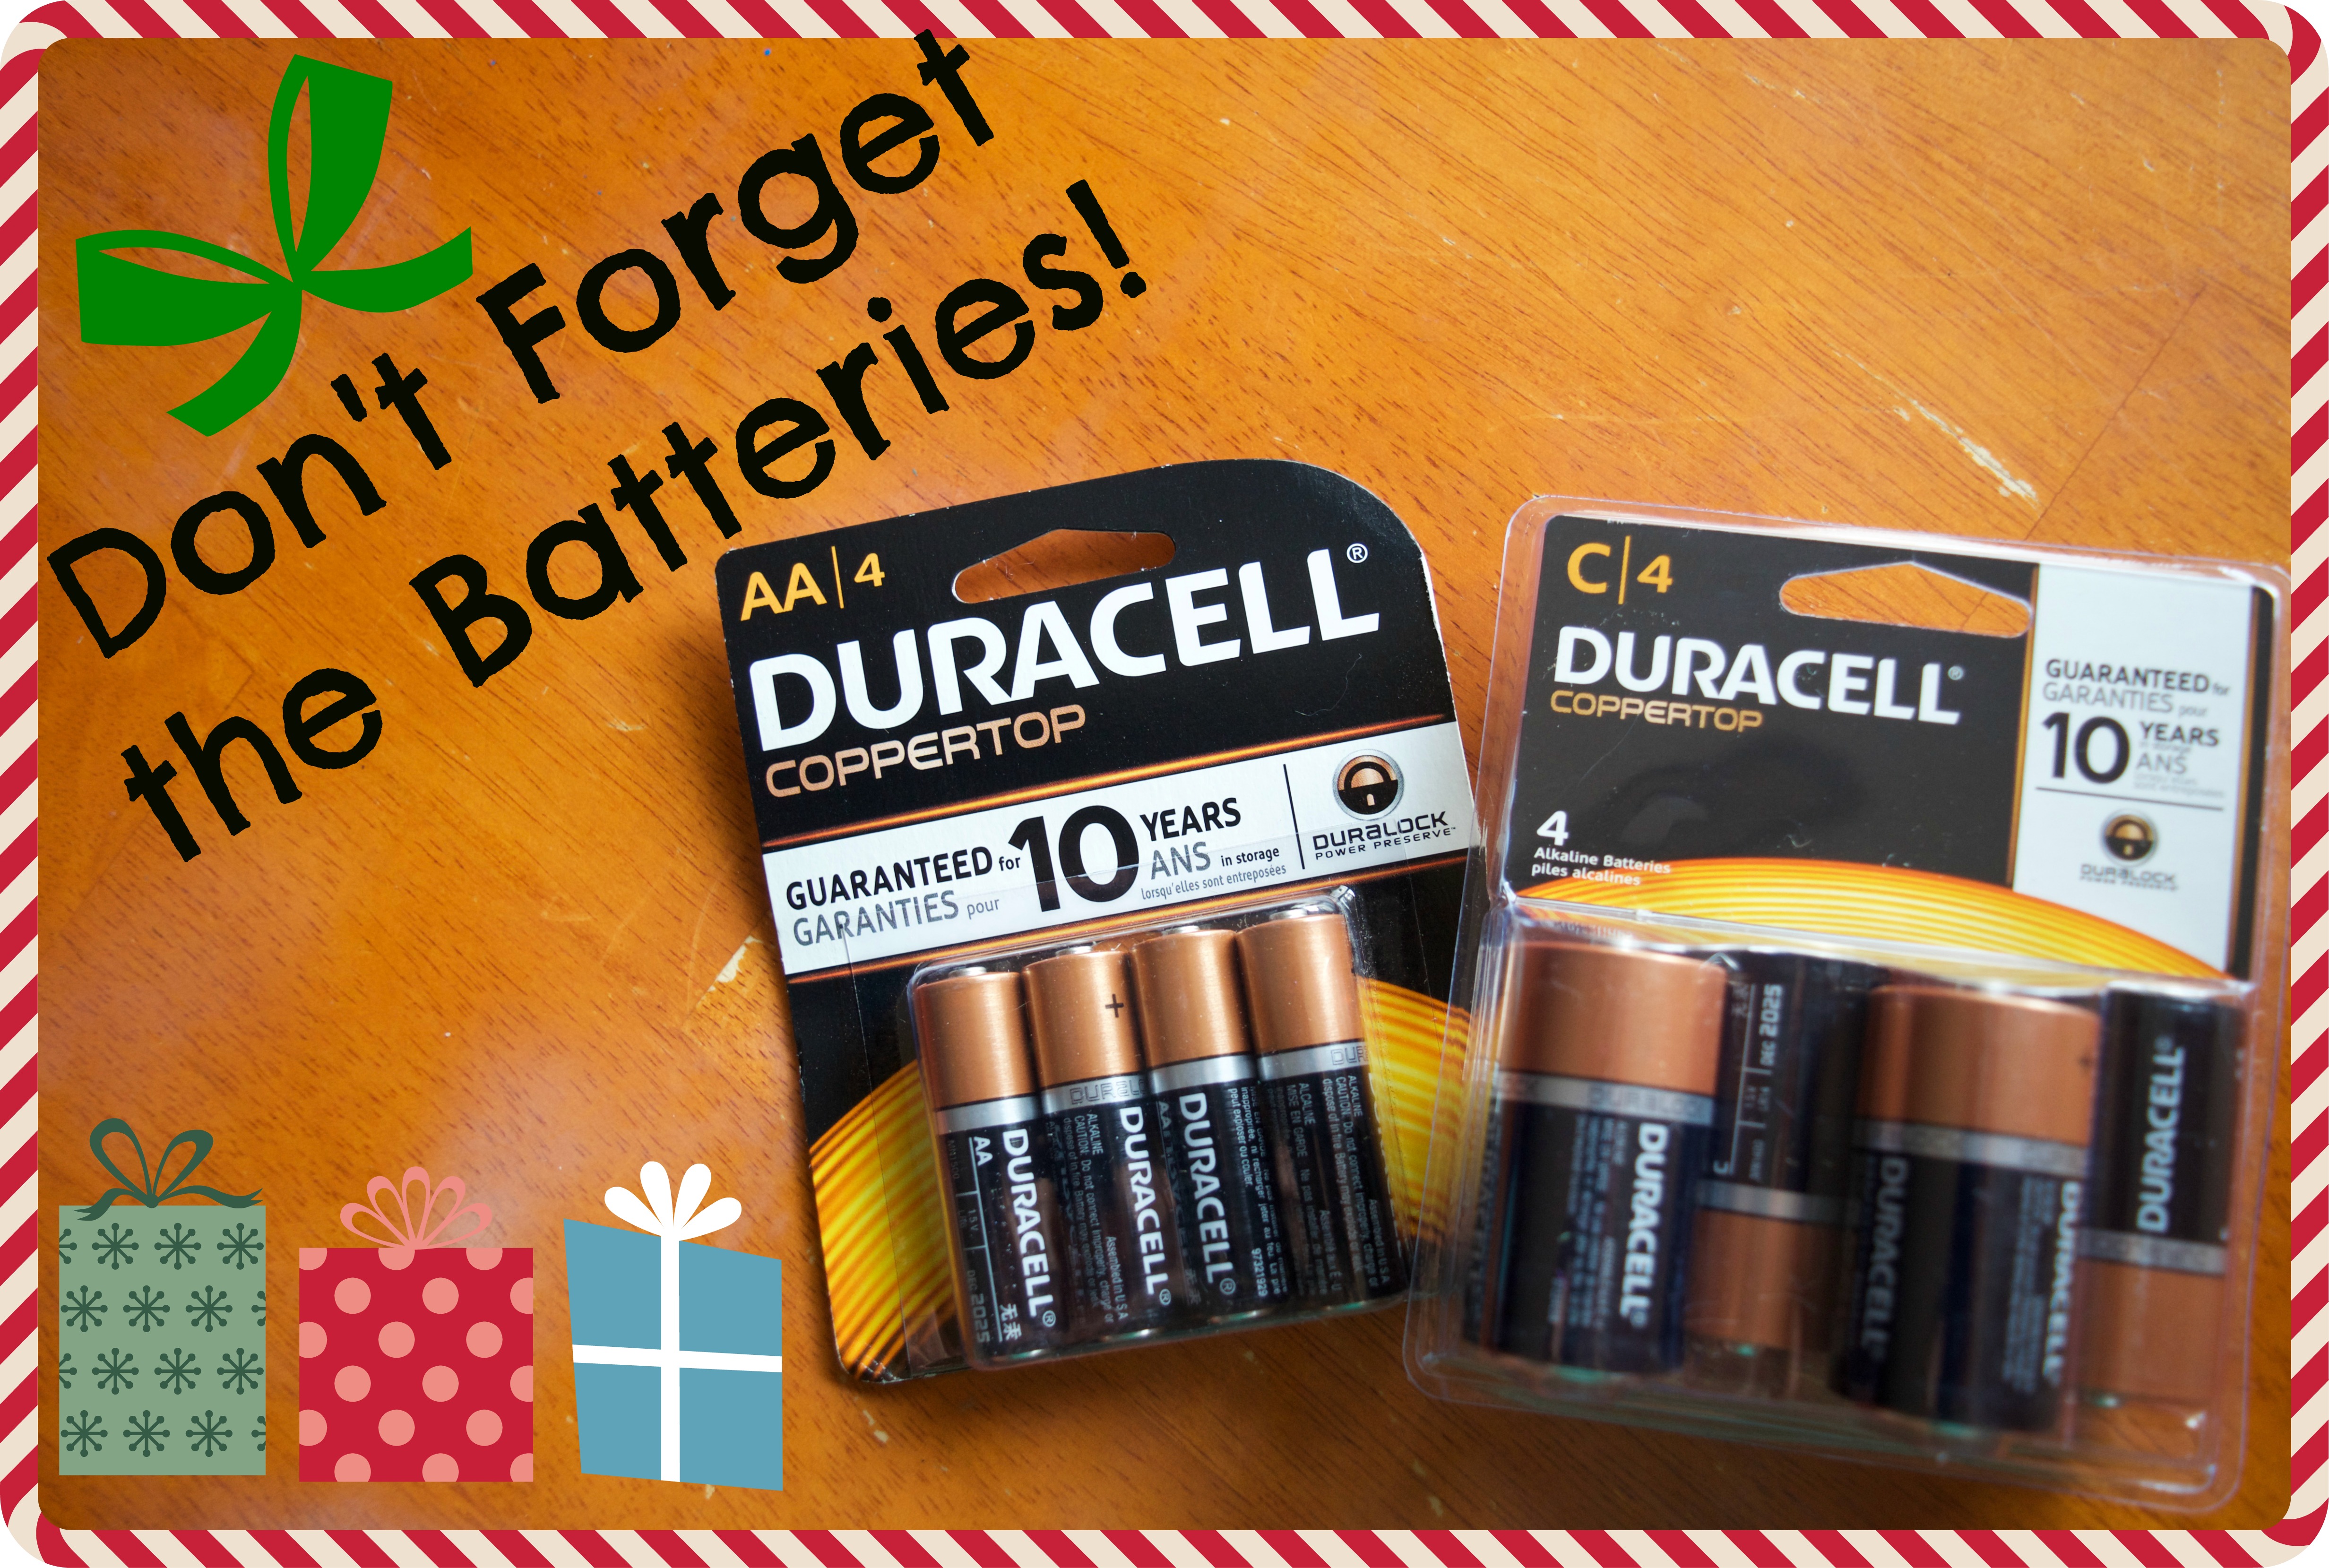 Don't forget the Duracell Batteries!